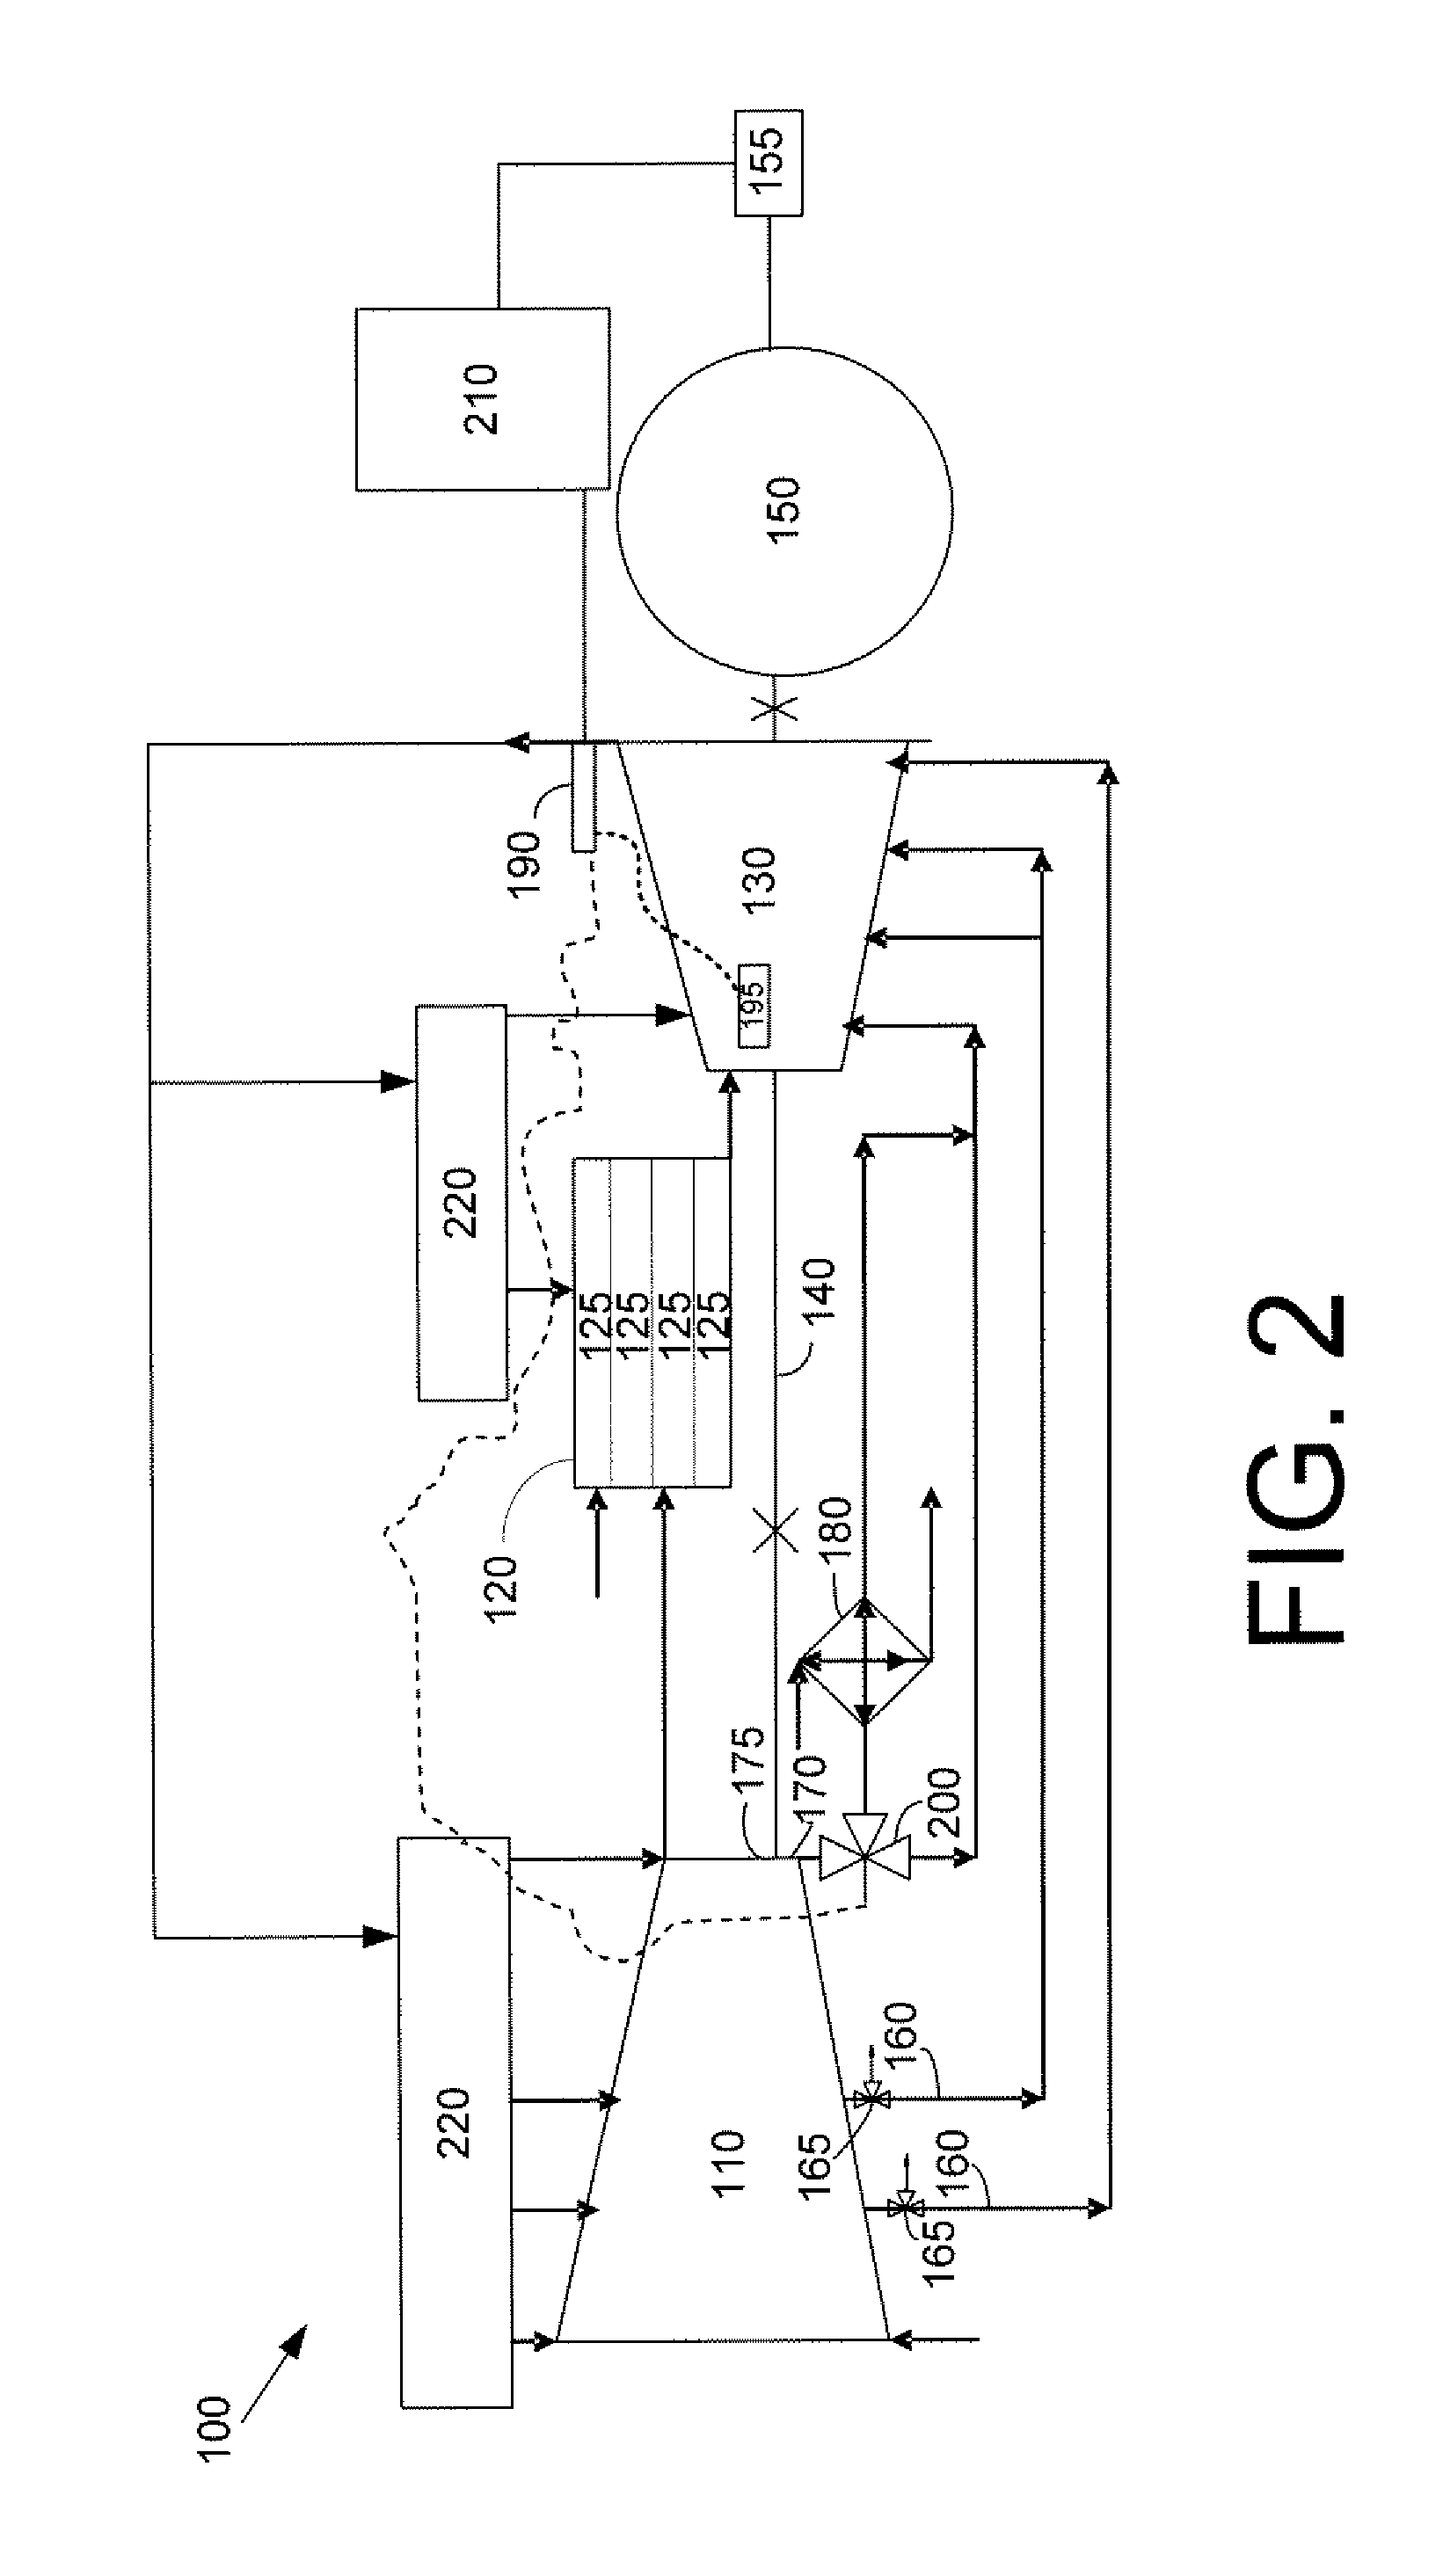 Methods and Systems for Gas Turbine Part-Load Operating Conditions